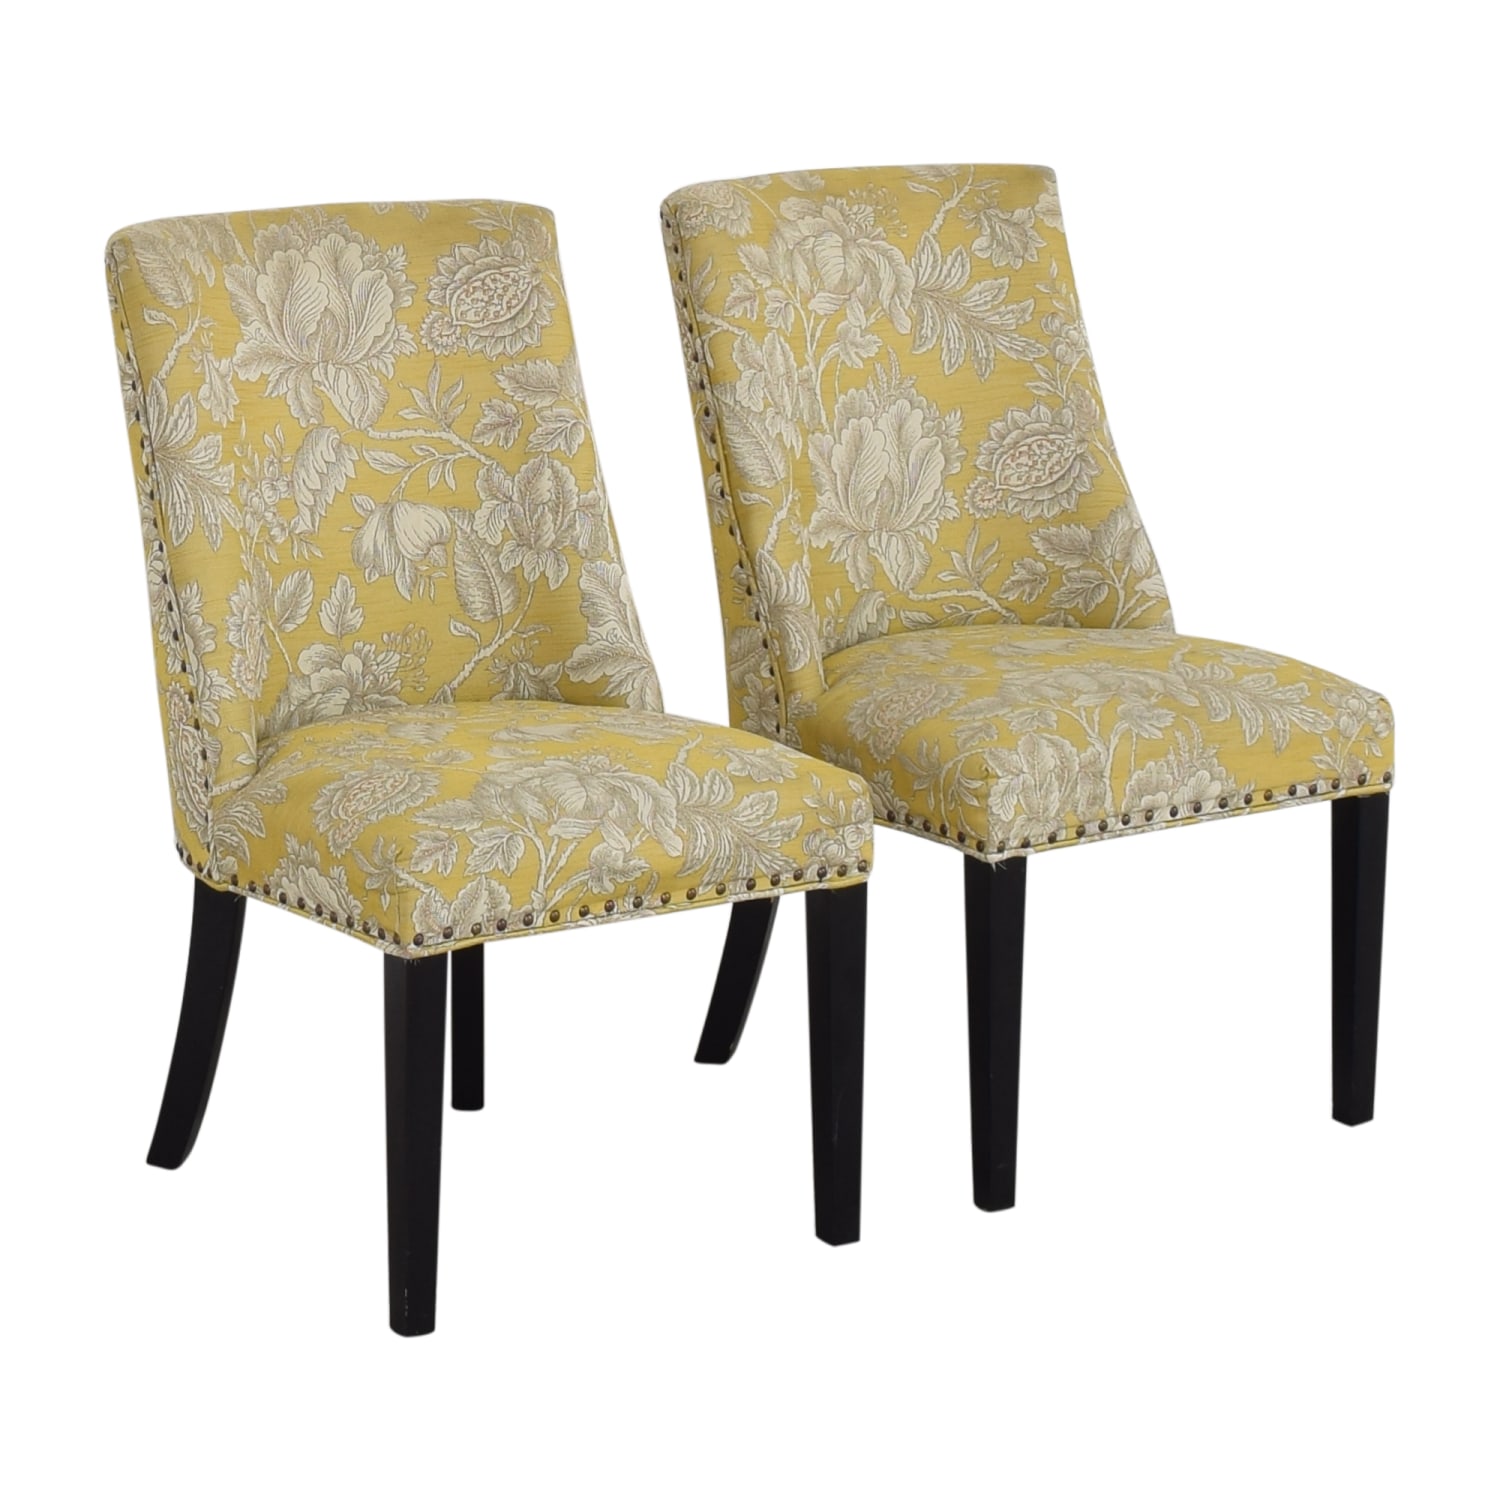 Pier 1 Corinne Floral Dining Chairs | 44% Off | Kaiyo